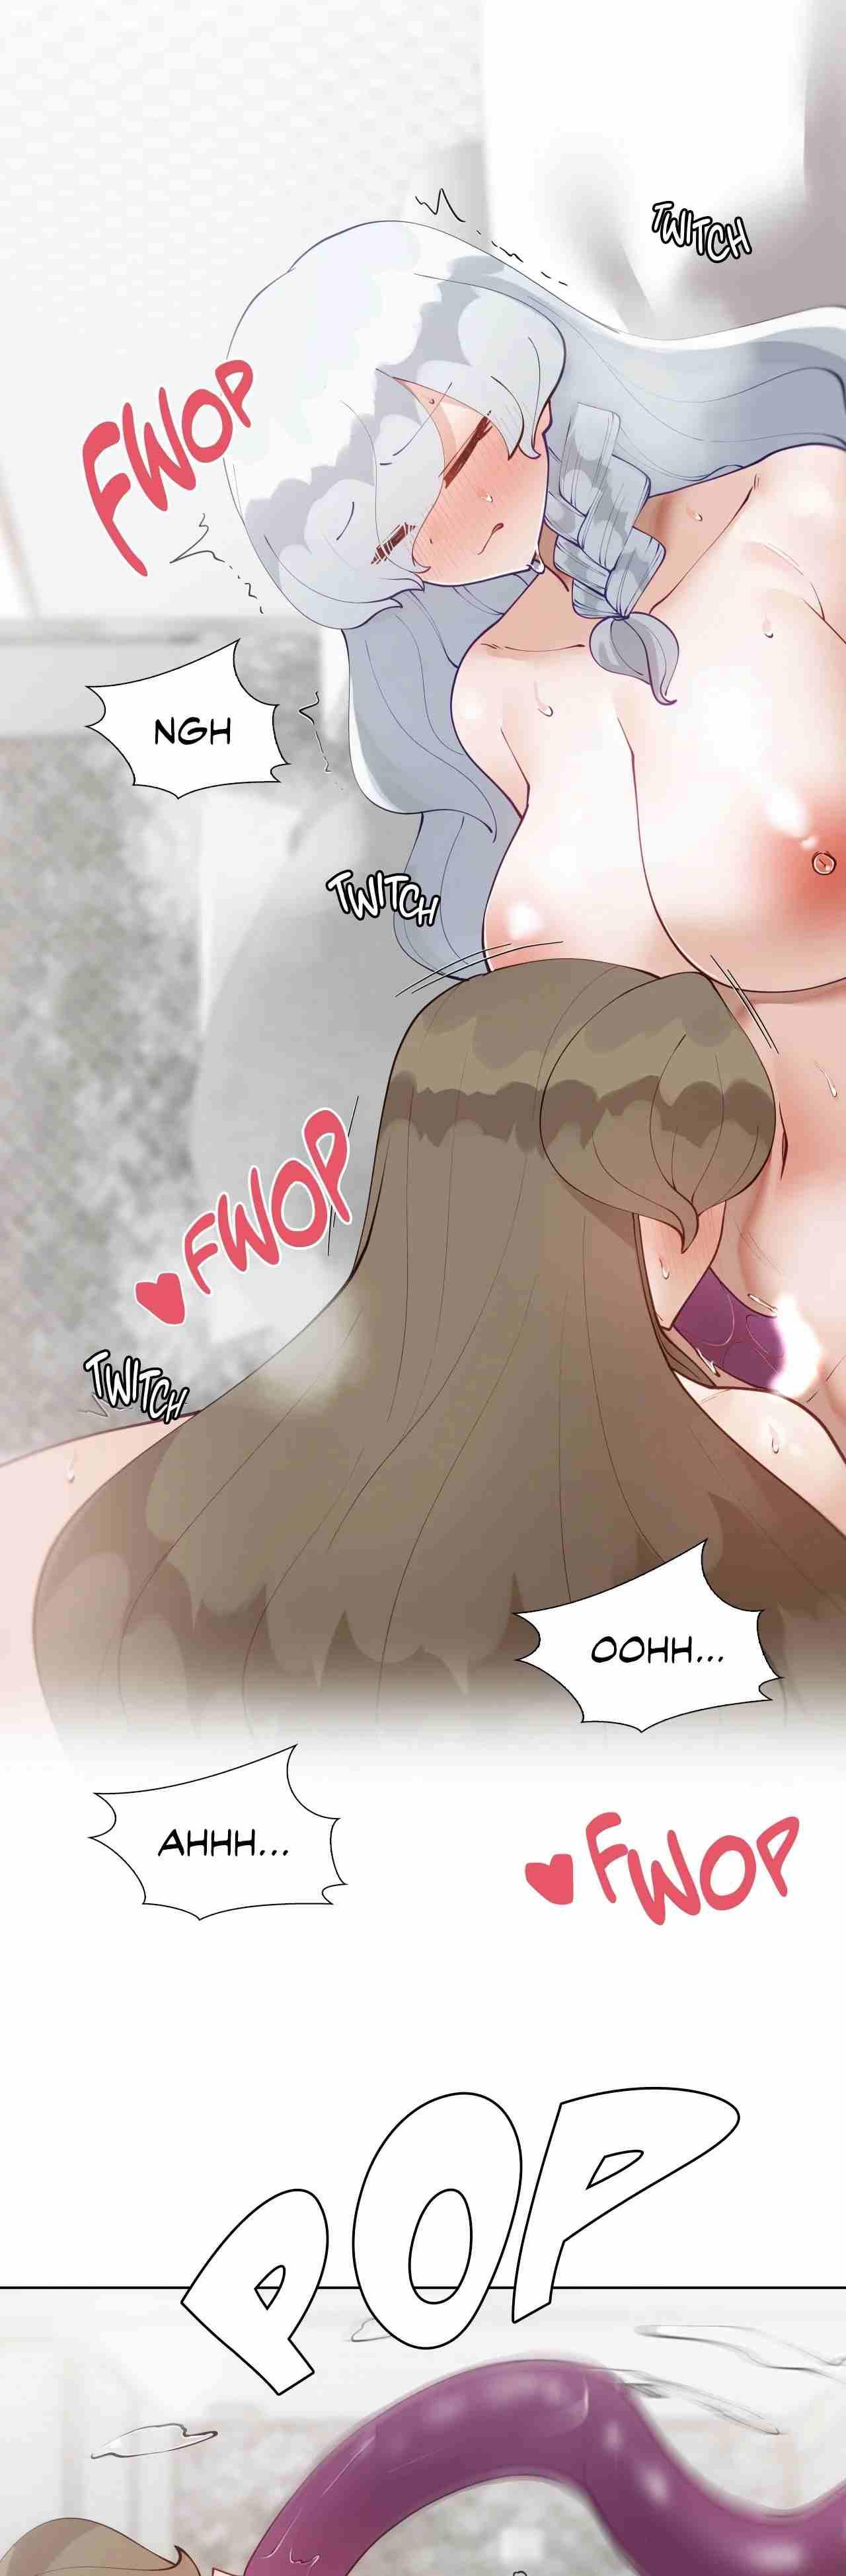 [Over.J, Choi Tae-young] Learning the Hard Way 2nd Season (After Story) Ch.2/? [English] [Manhwa PDF] Ongoing 73